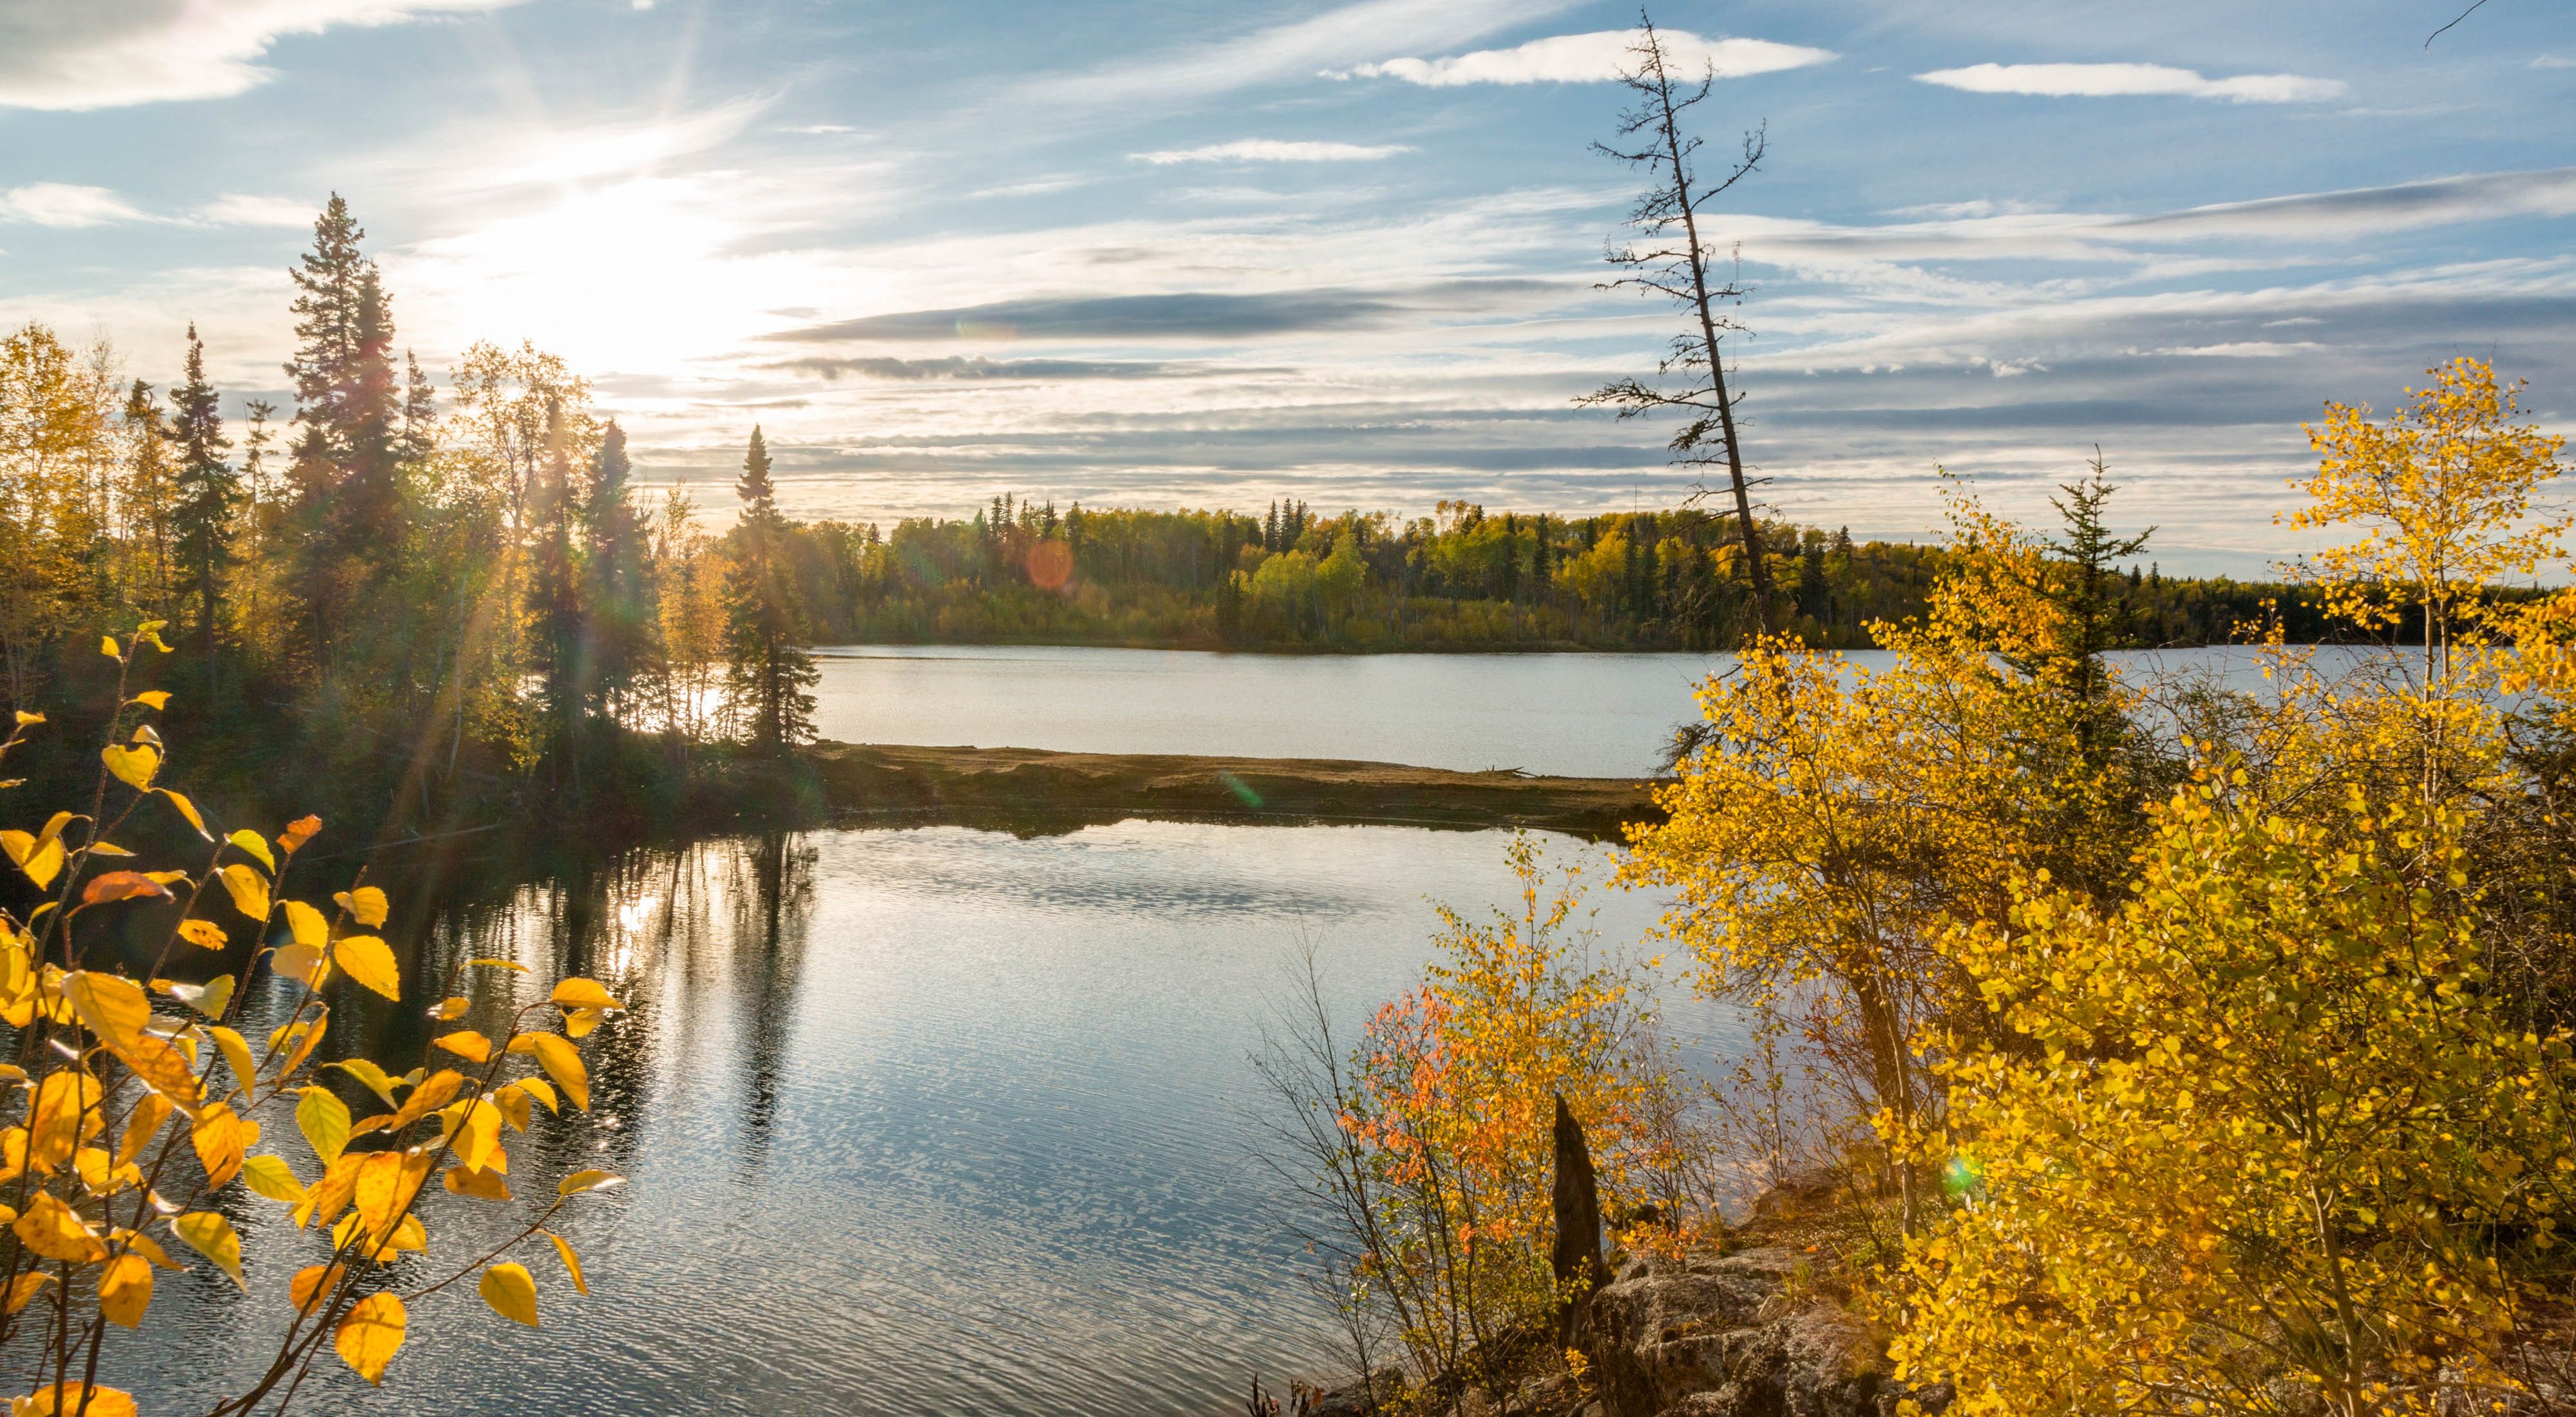 Spanning 1.3 billion acres, the boreal forest is the Earth's largest terrestrial carbon sink.